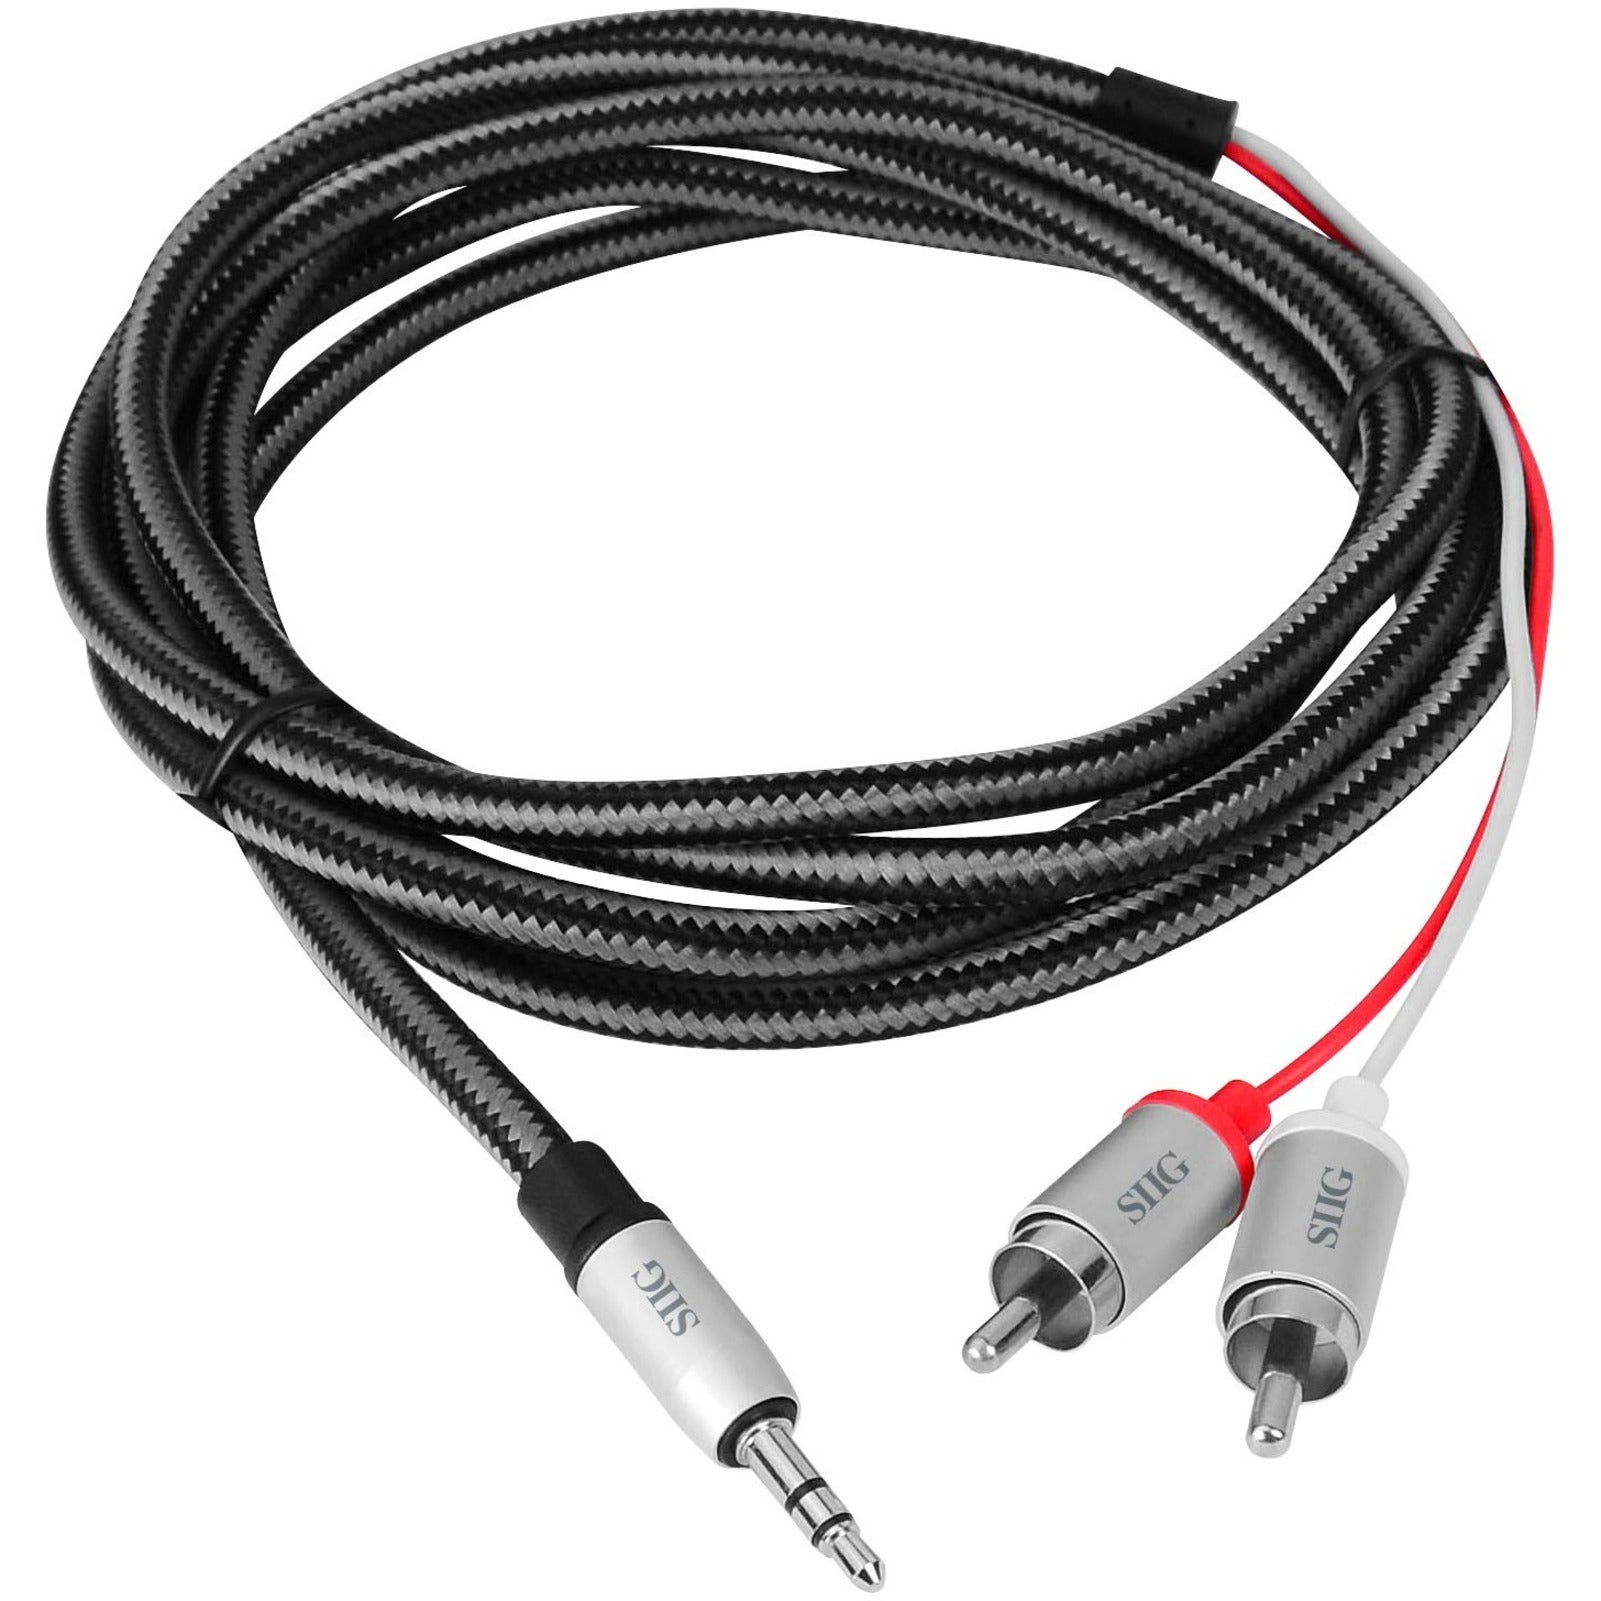 SIIG CB-AU0F12-S1 Woven Fabric Braided 3.5mm to RCA Stereo Cable (M/M) - 2M, Tangle-Free, Lossless Audio, Durable